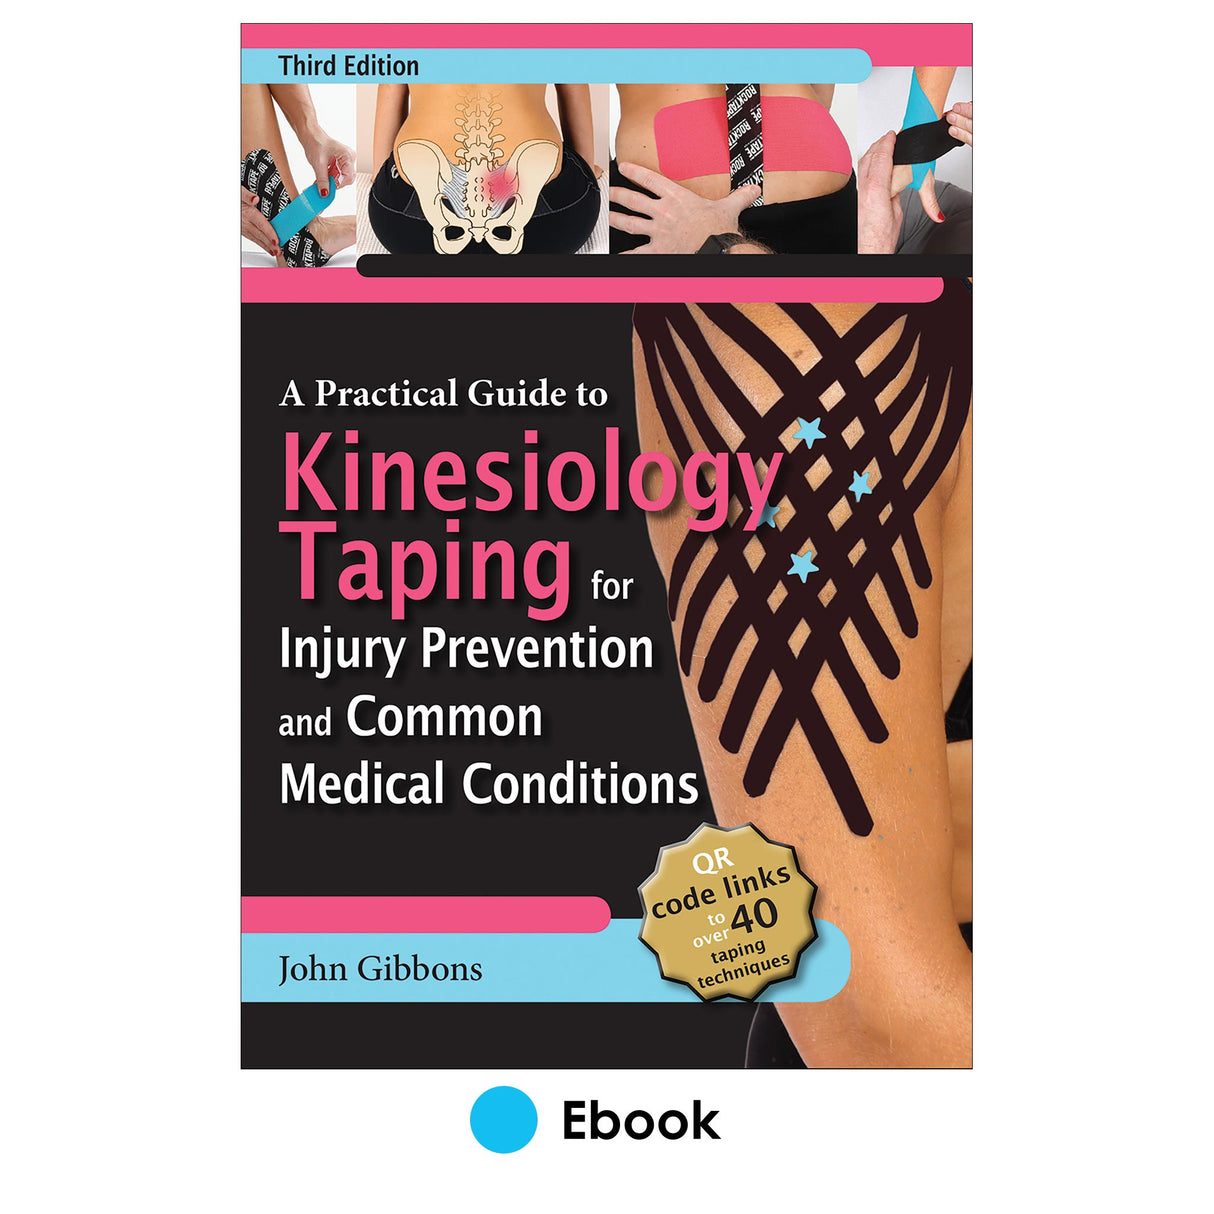 Practical Guide to Kinesiology Taping for Injury Prevention and Common Medical Conditions 3rd Edition epub, A